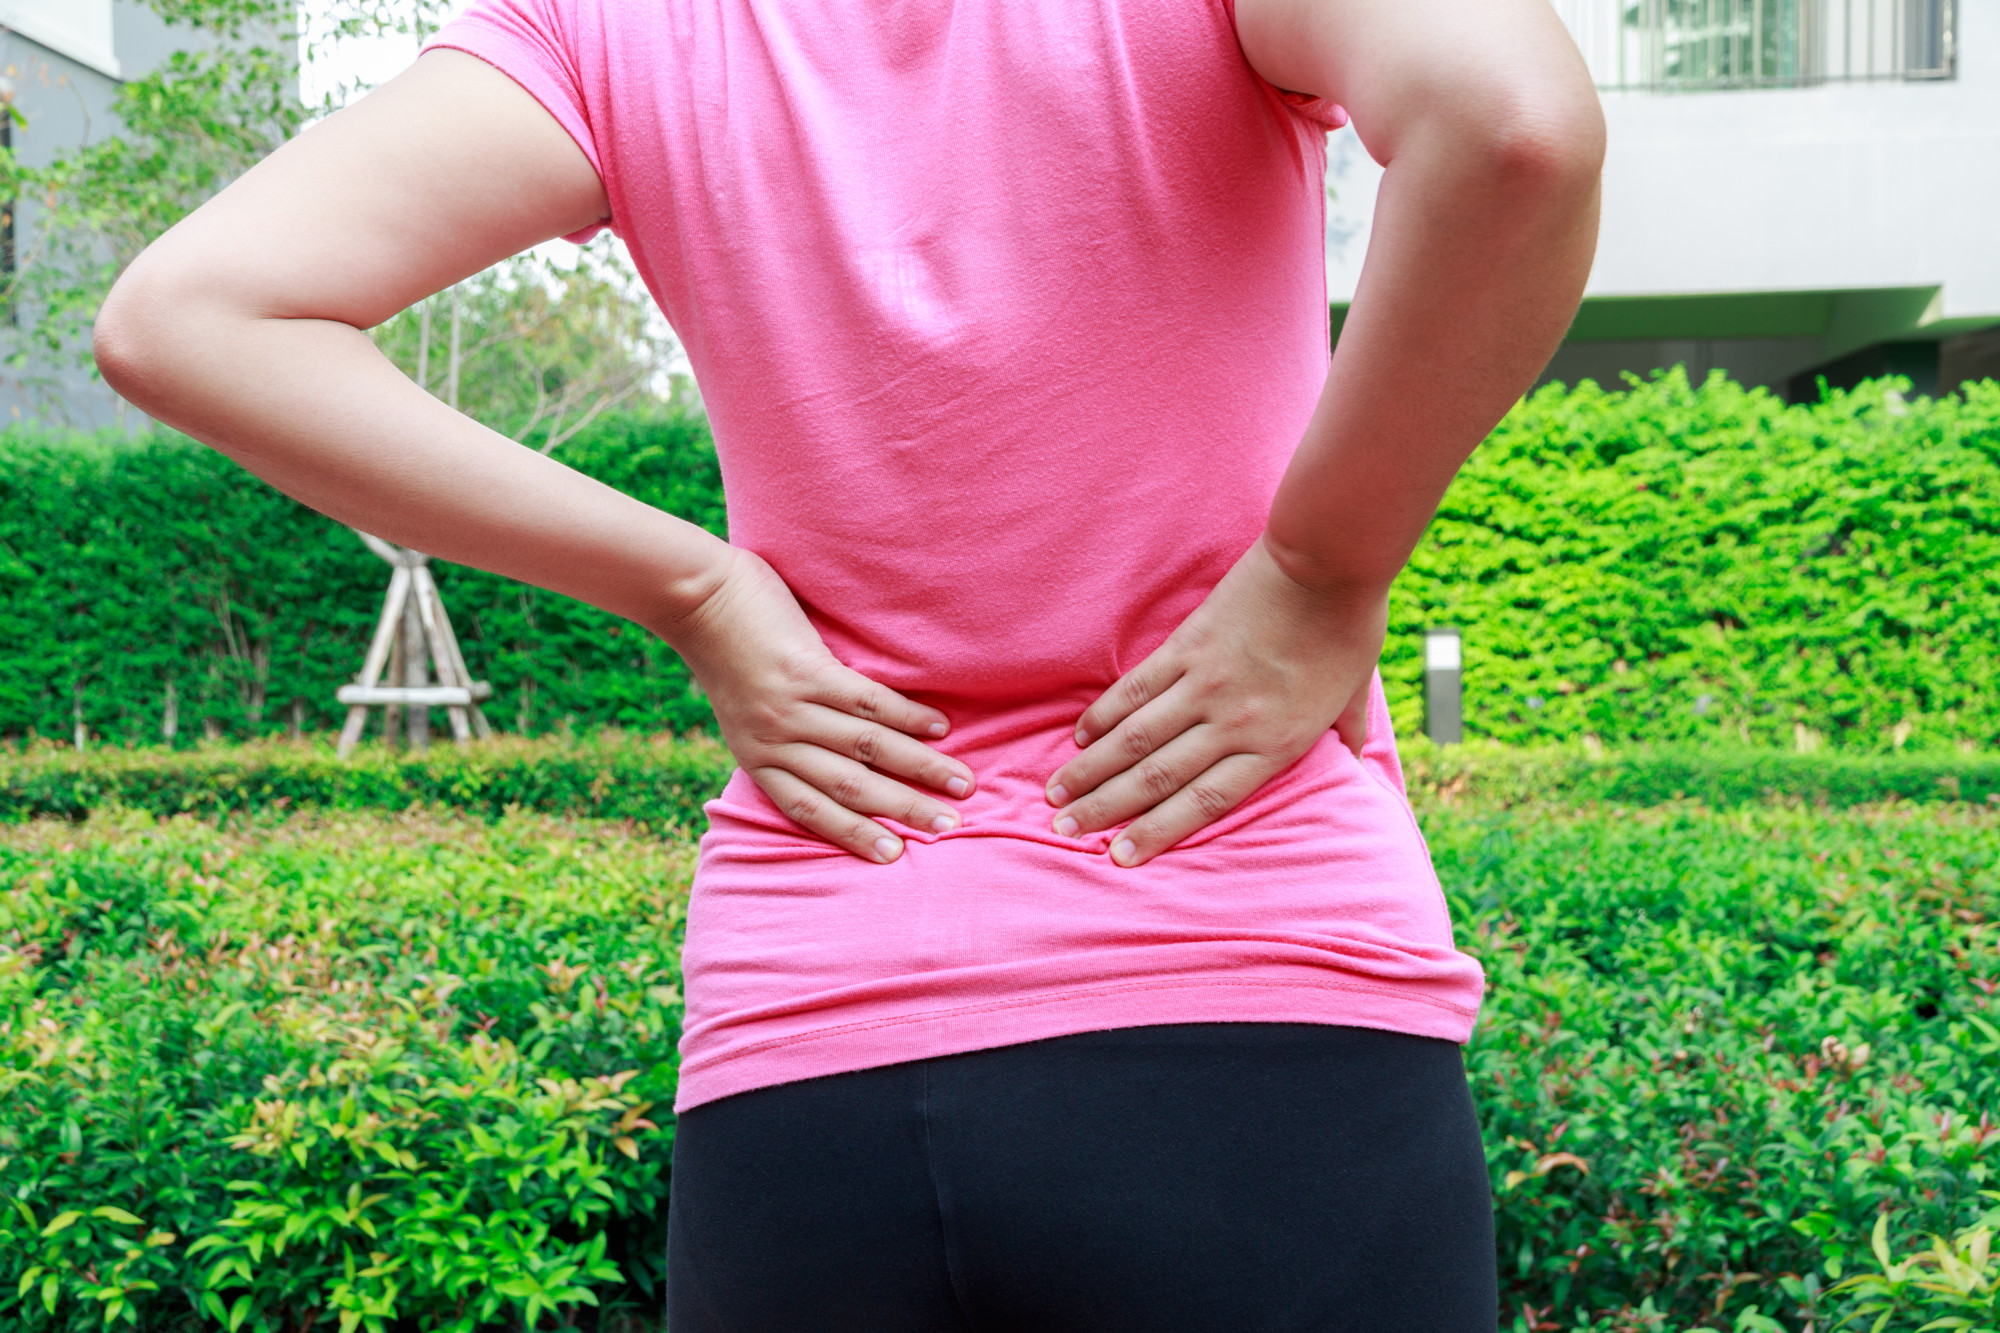 female with lower back pain